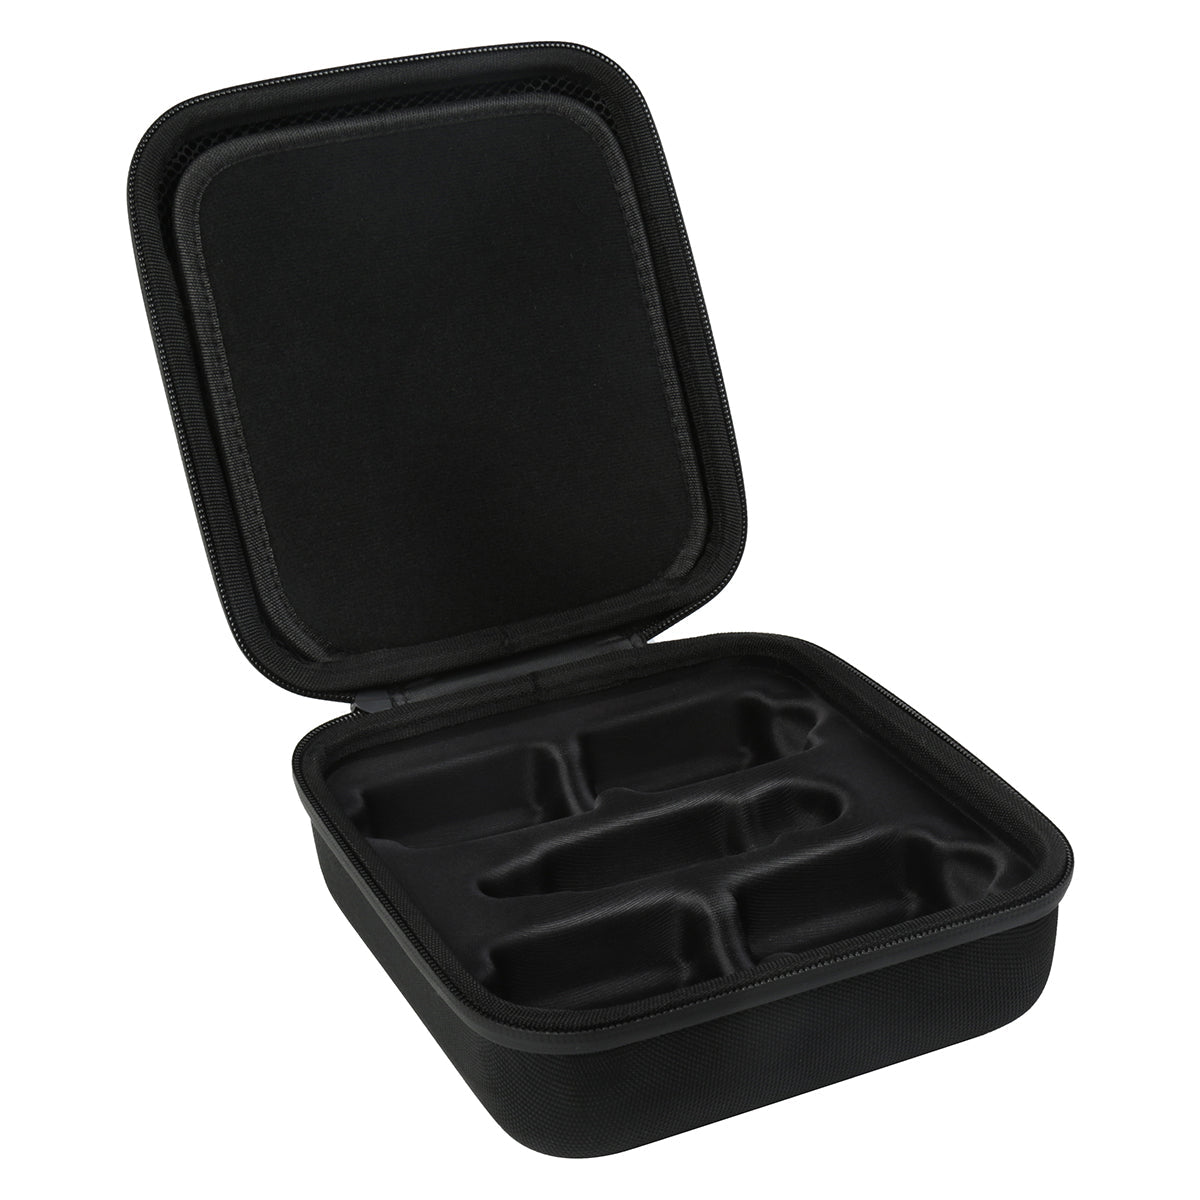 Xvive Travel Case for XU4R4 In-Ear Monitor Wireless System (4 Receivers), Travel Case for sale at Richards Guitars.